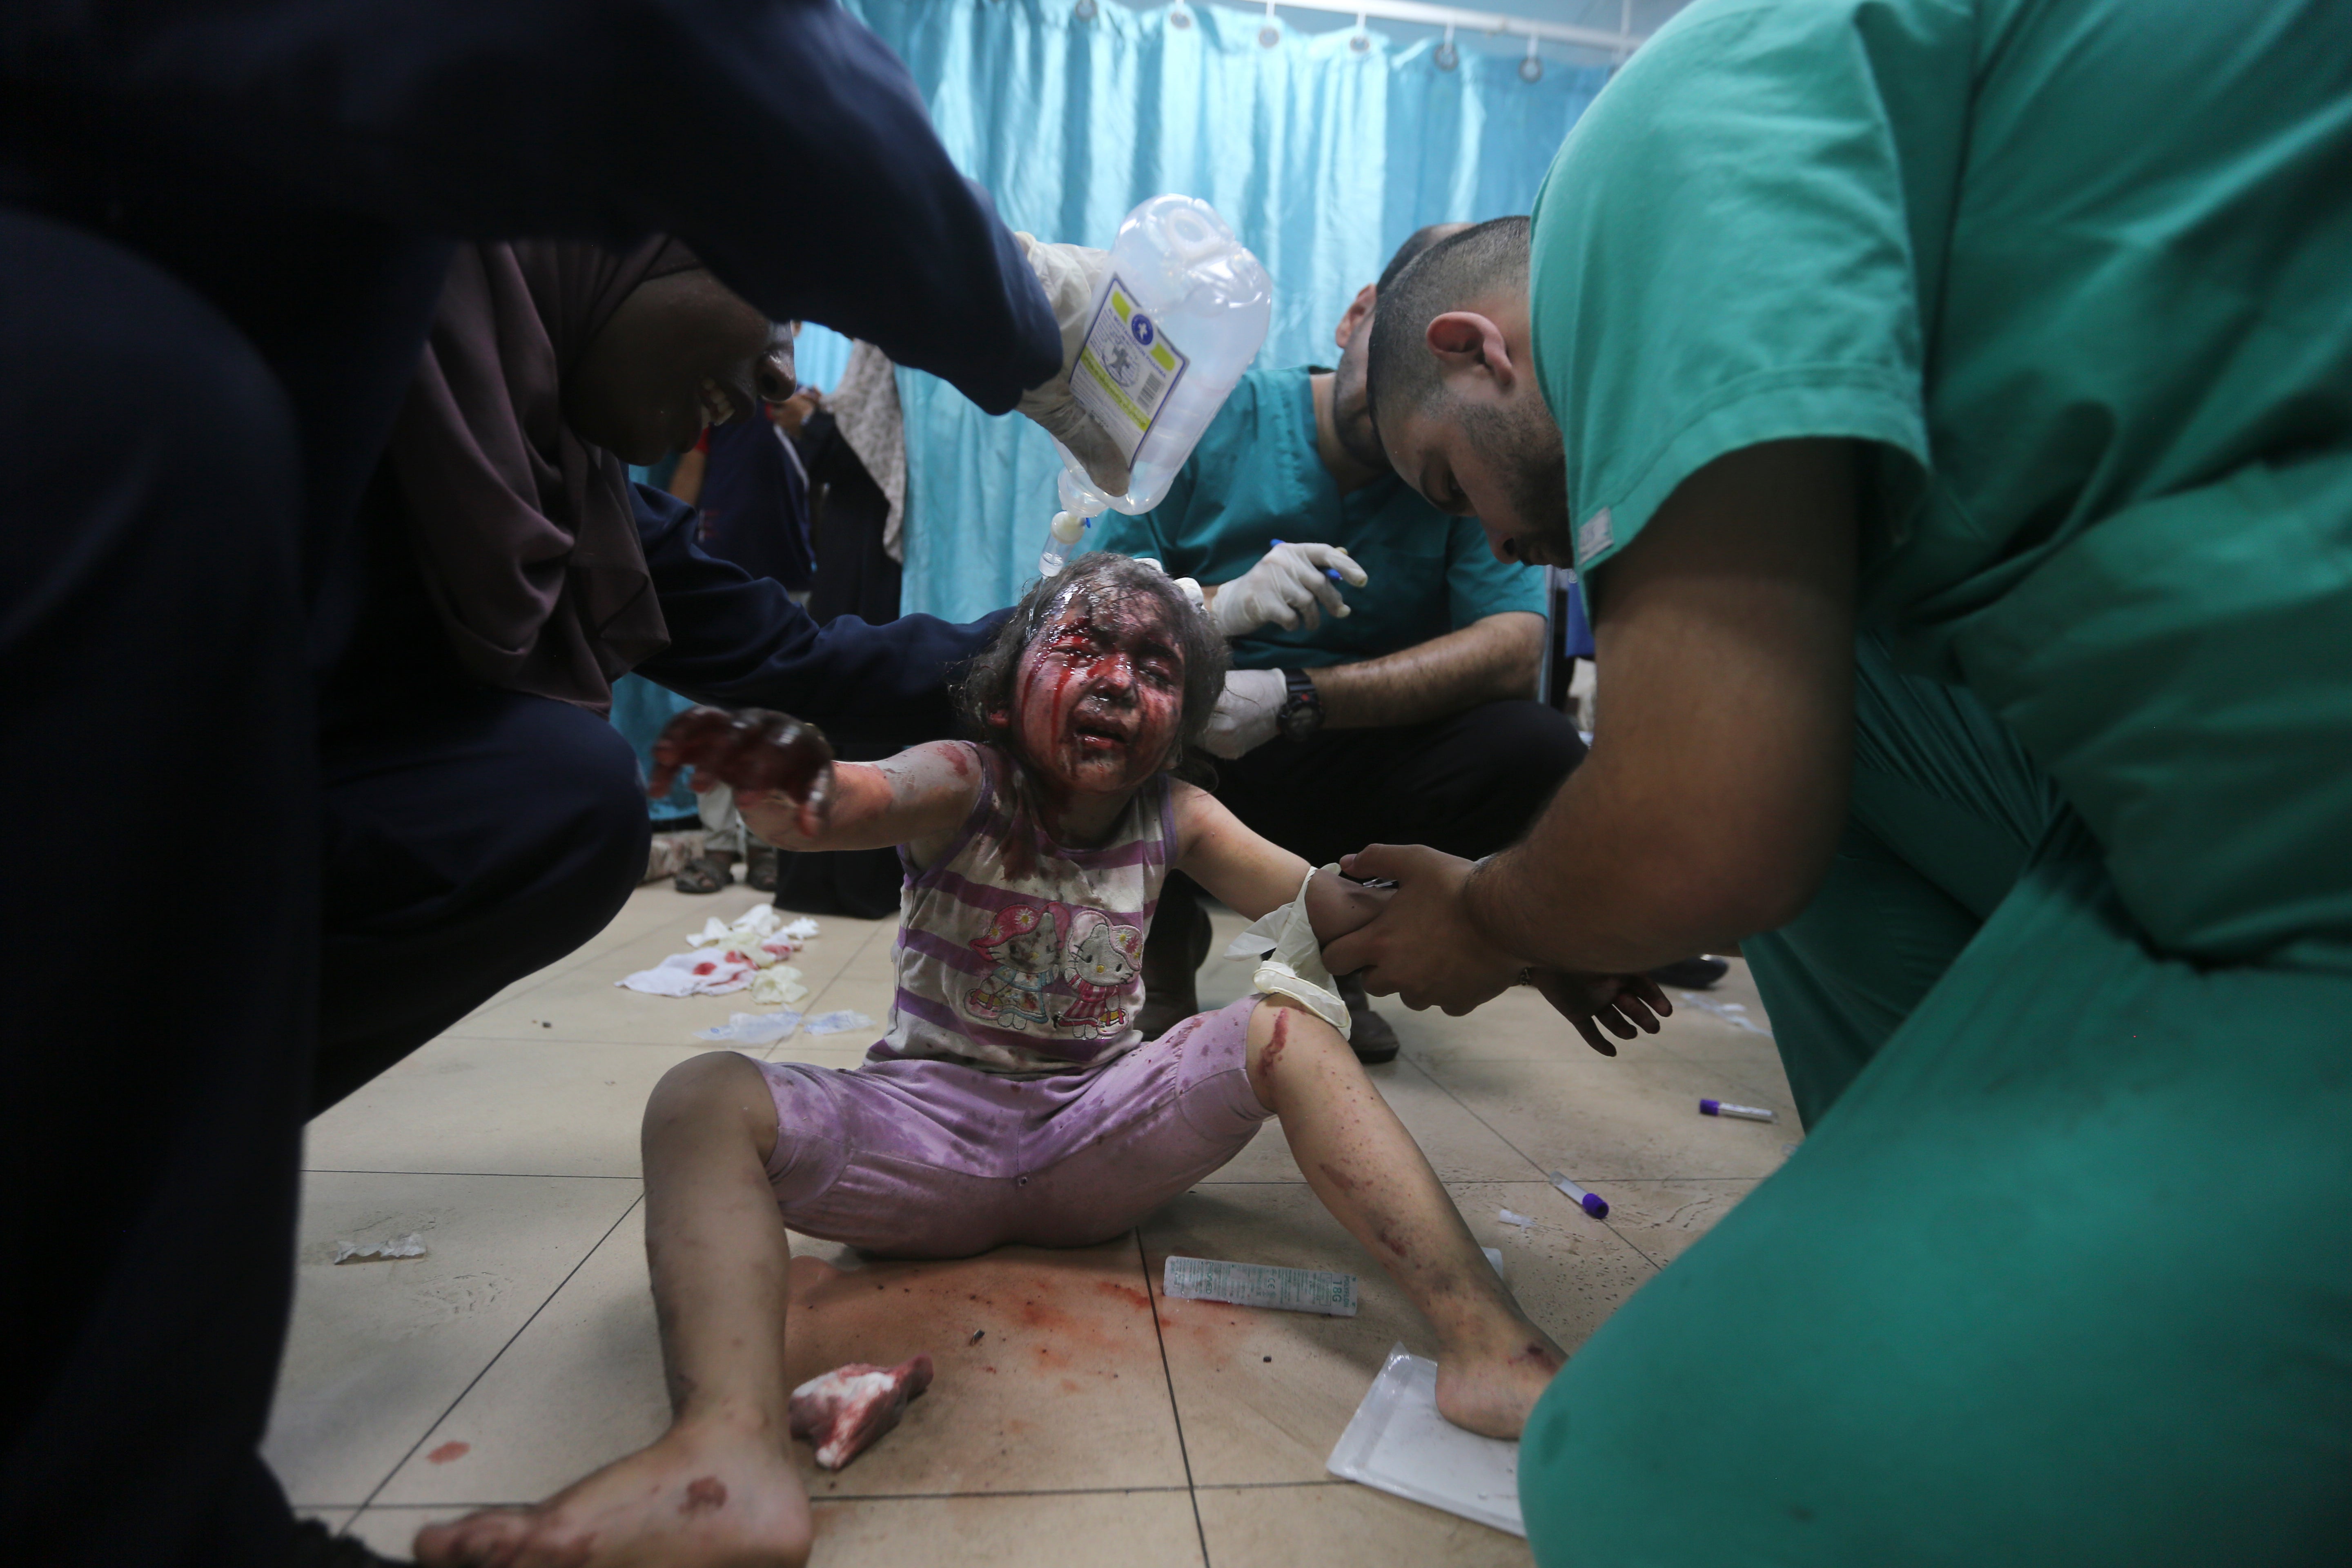 An injured Palestinian child is being treated at Al-Aqsa Hospital in Gaza